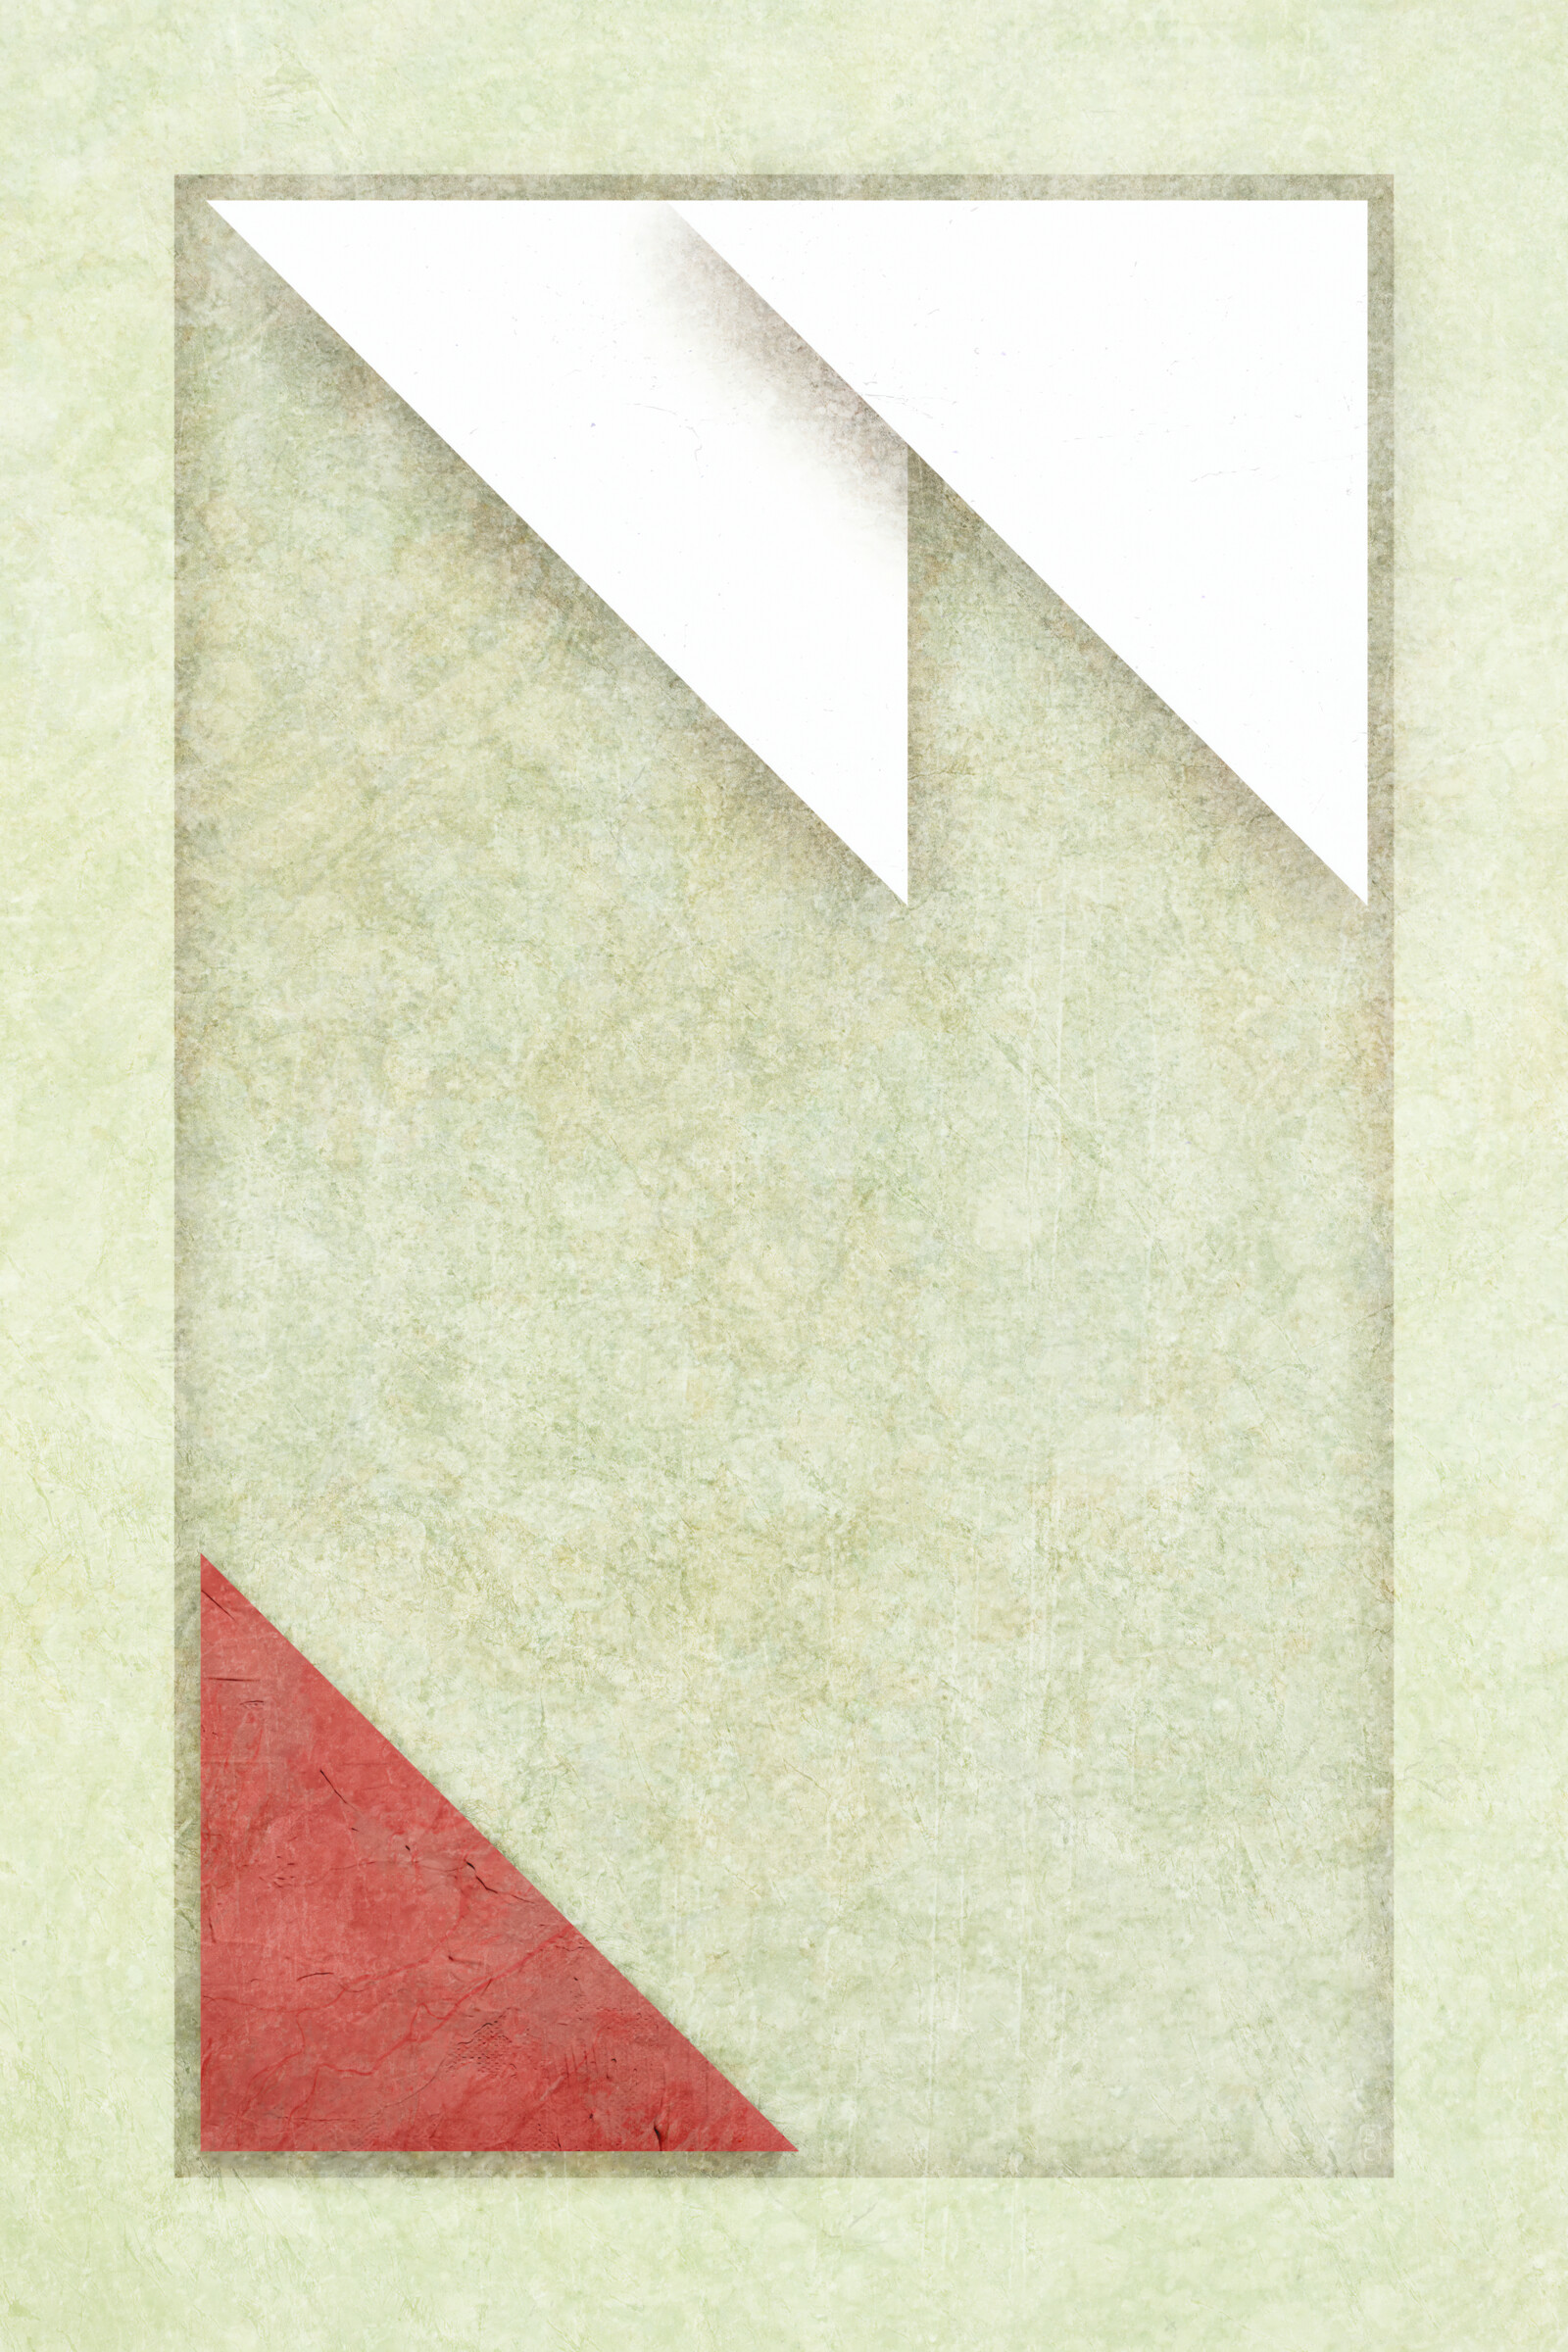 A red triangle at lower left with two white triangles at upper right.